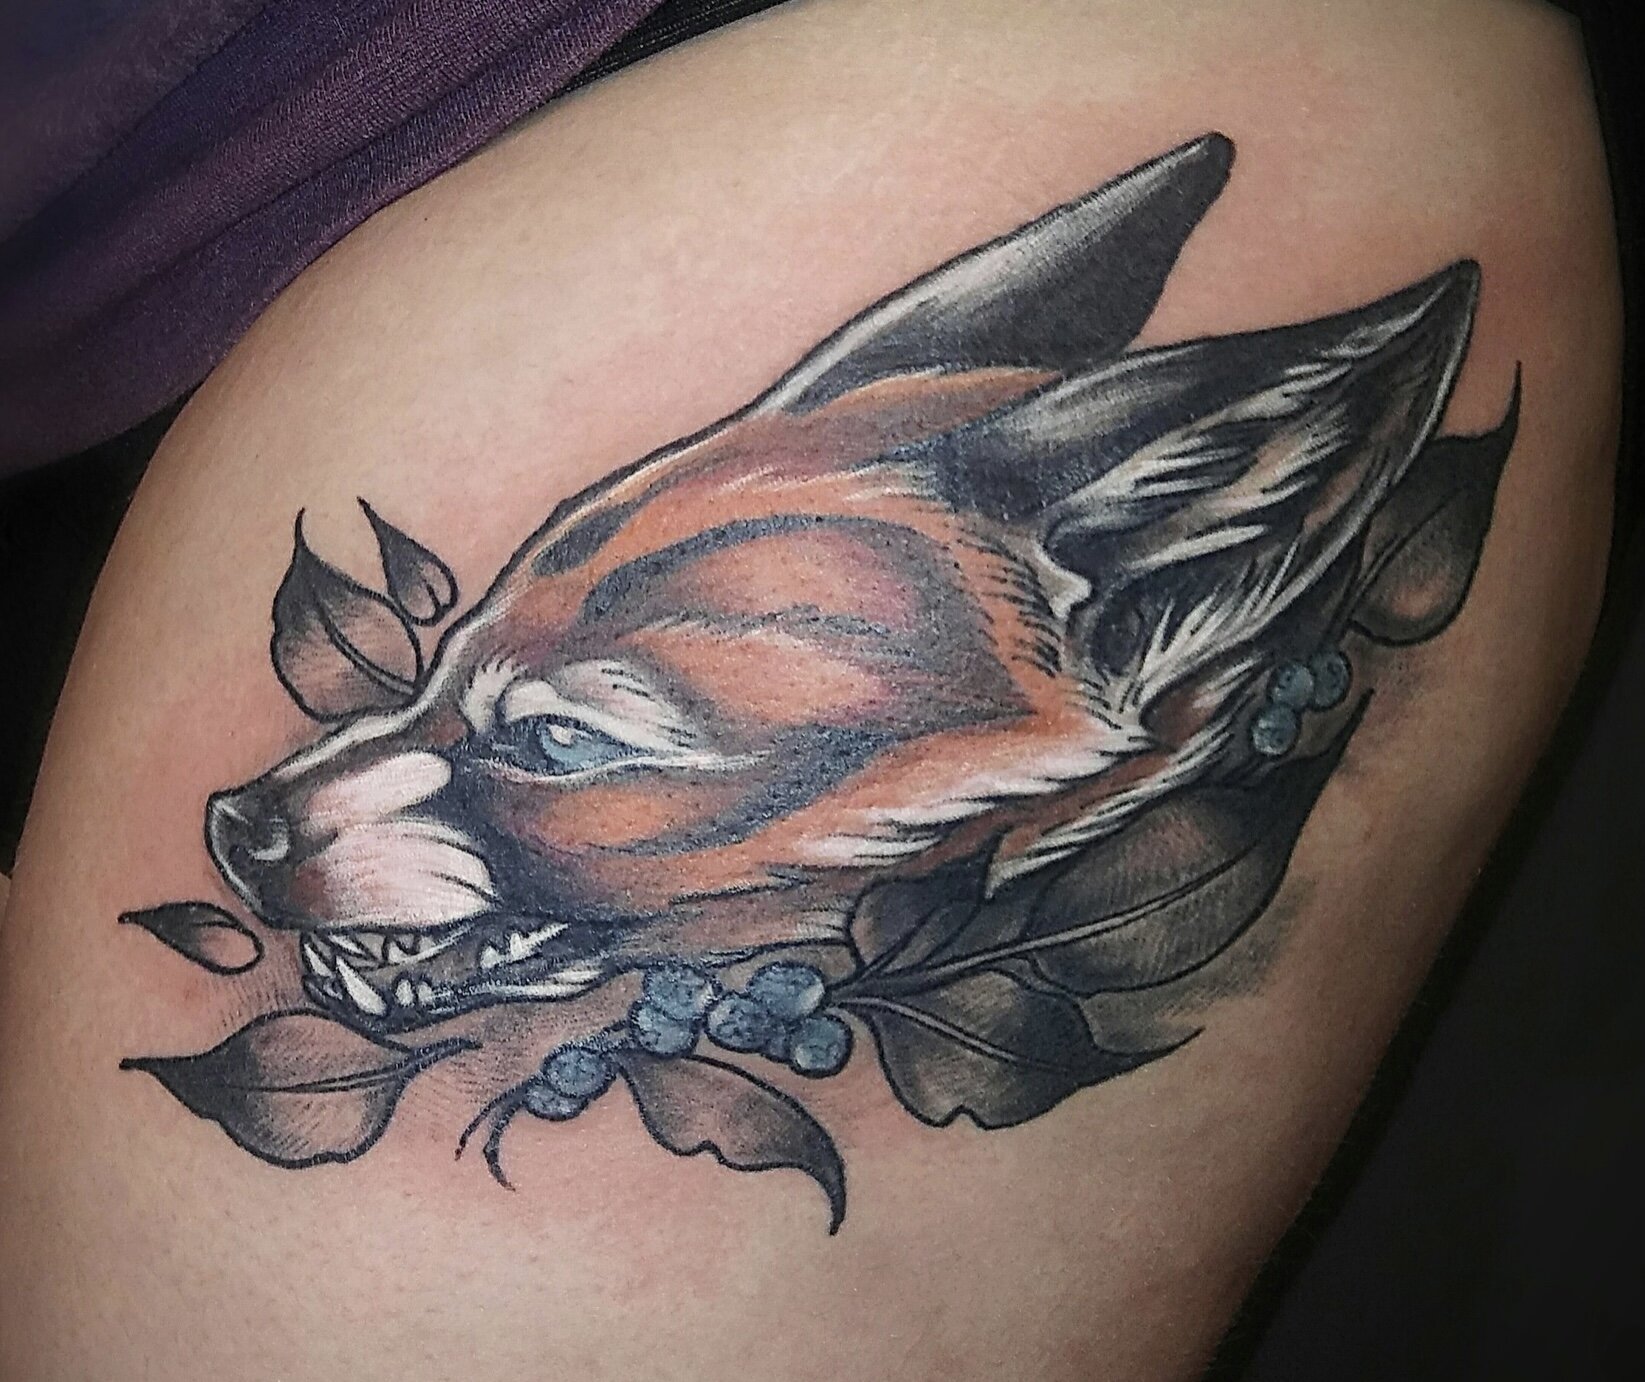 Angry Badger Tattoo Studio - Anubis by Tom (sassytatts) | Facebook